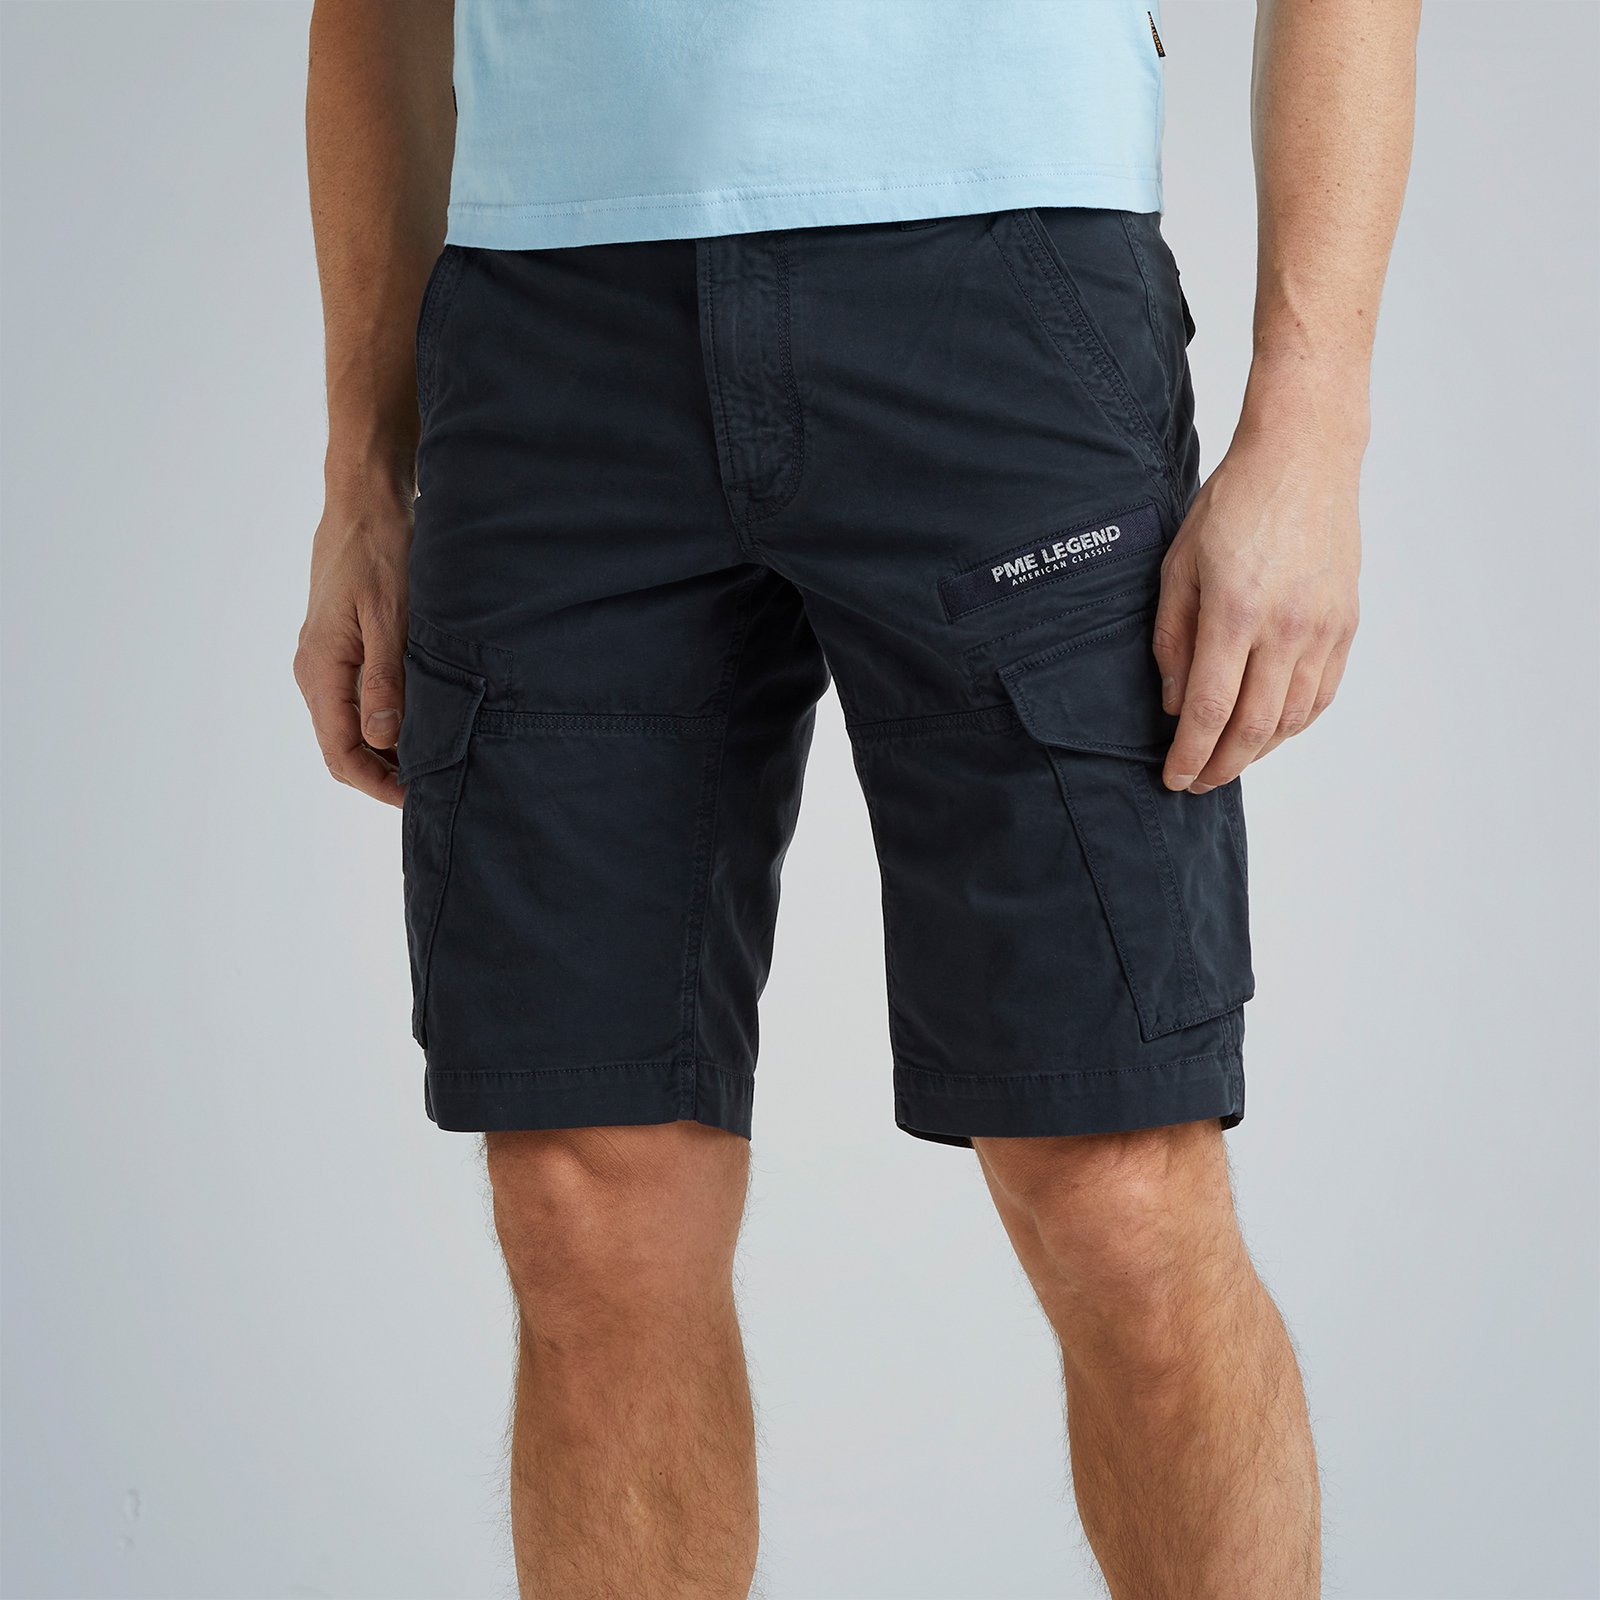 PME LEGEND | Nordrop Free returns Cargo | Short shipping and